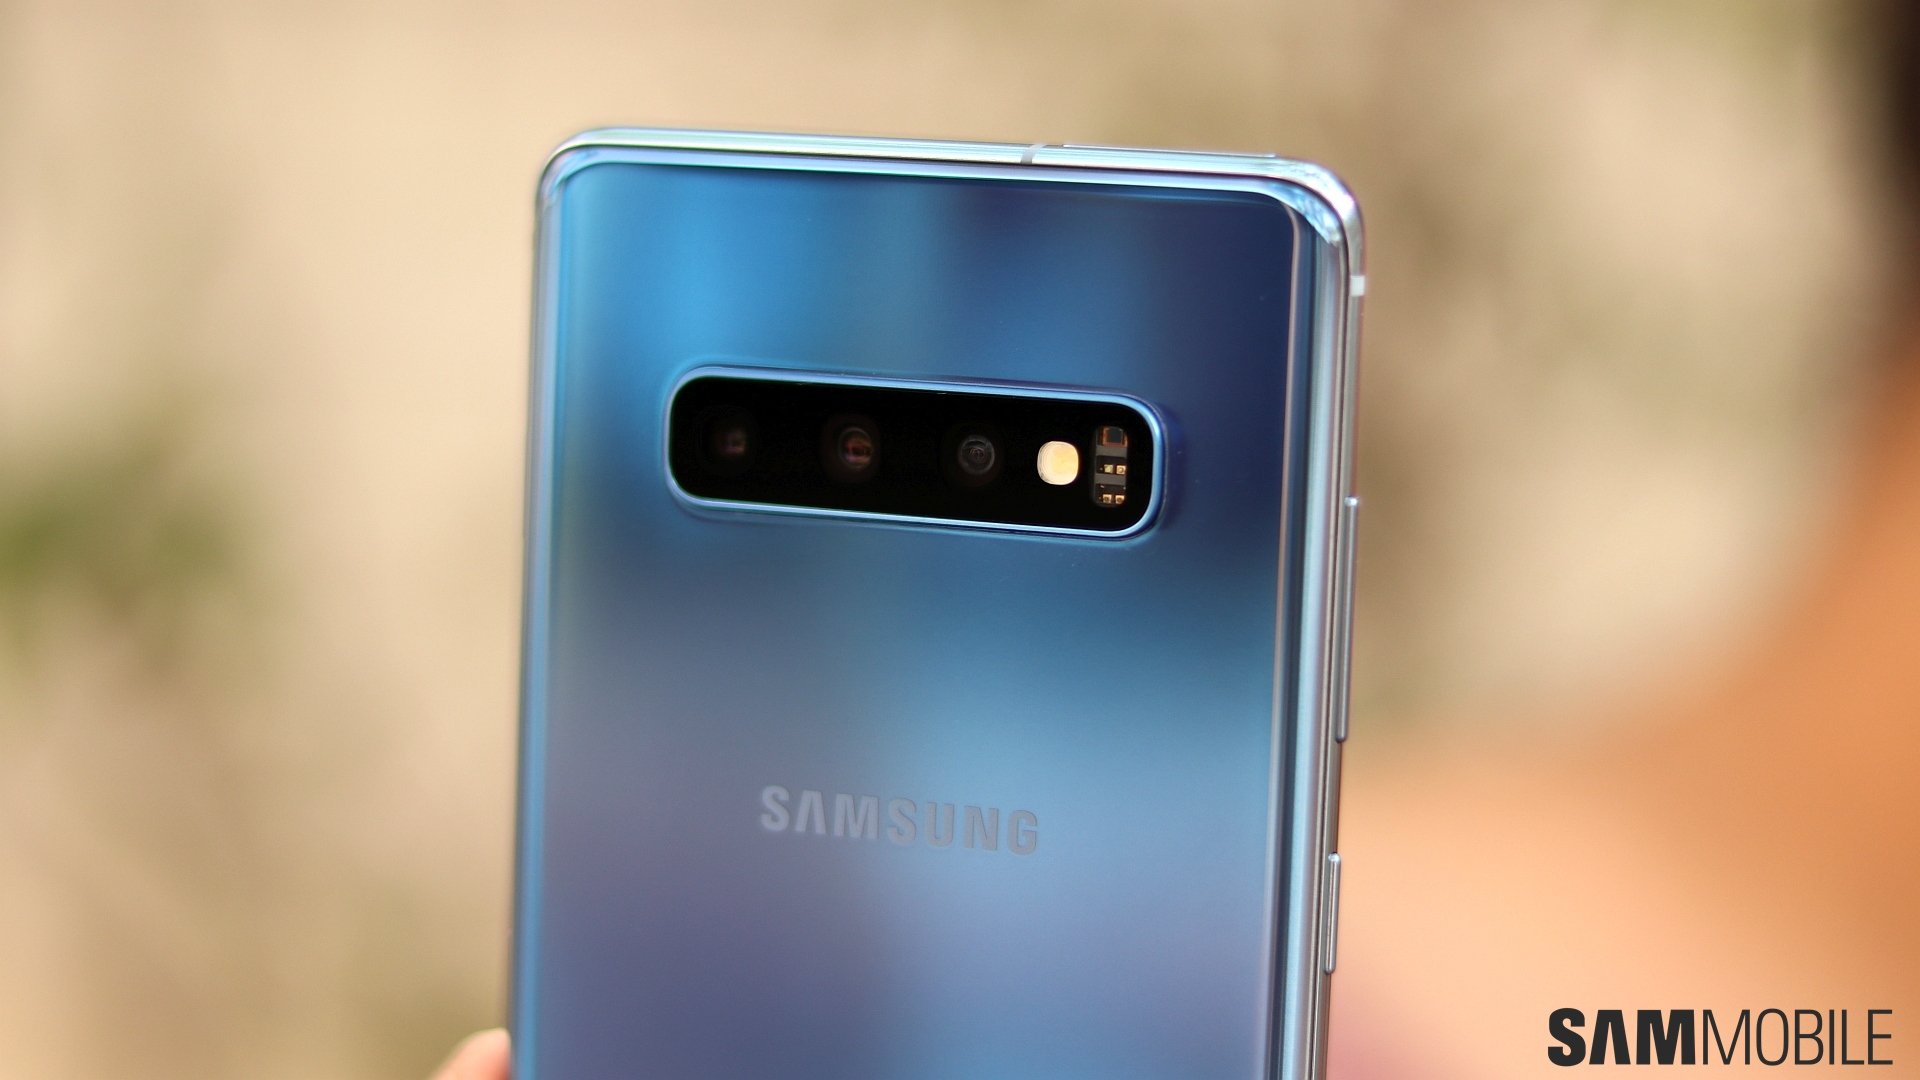 Some Galaxy S10 customers have received phones in unsealed boxes